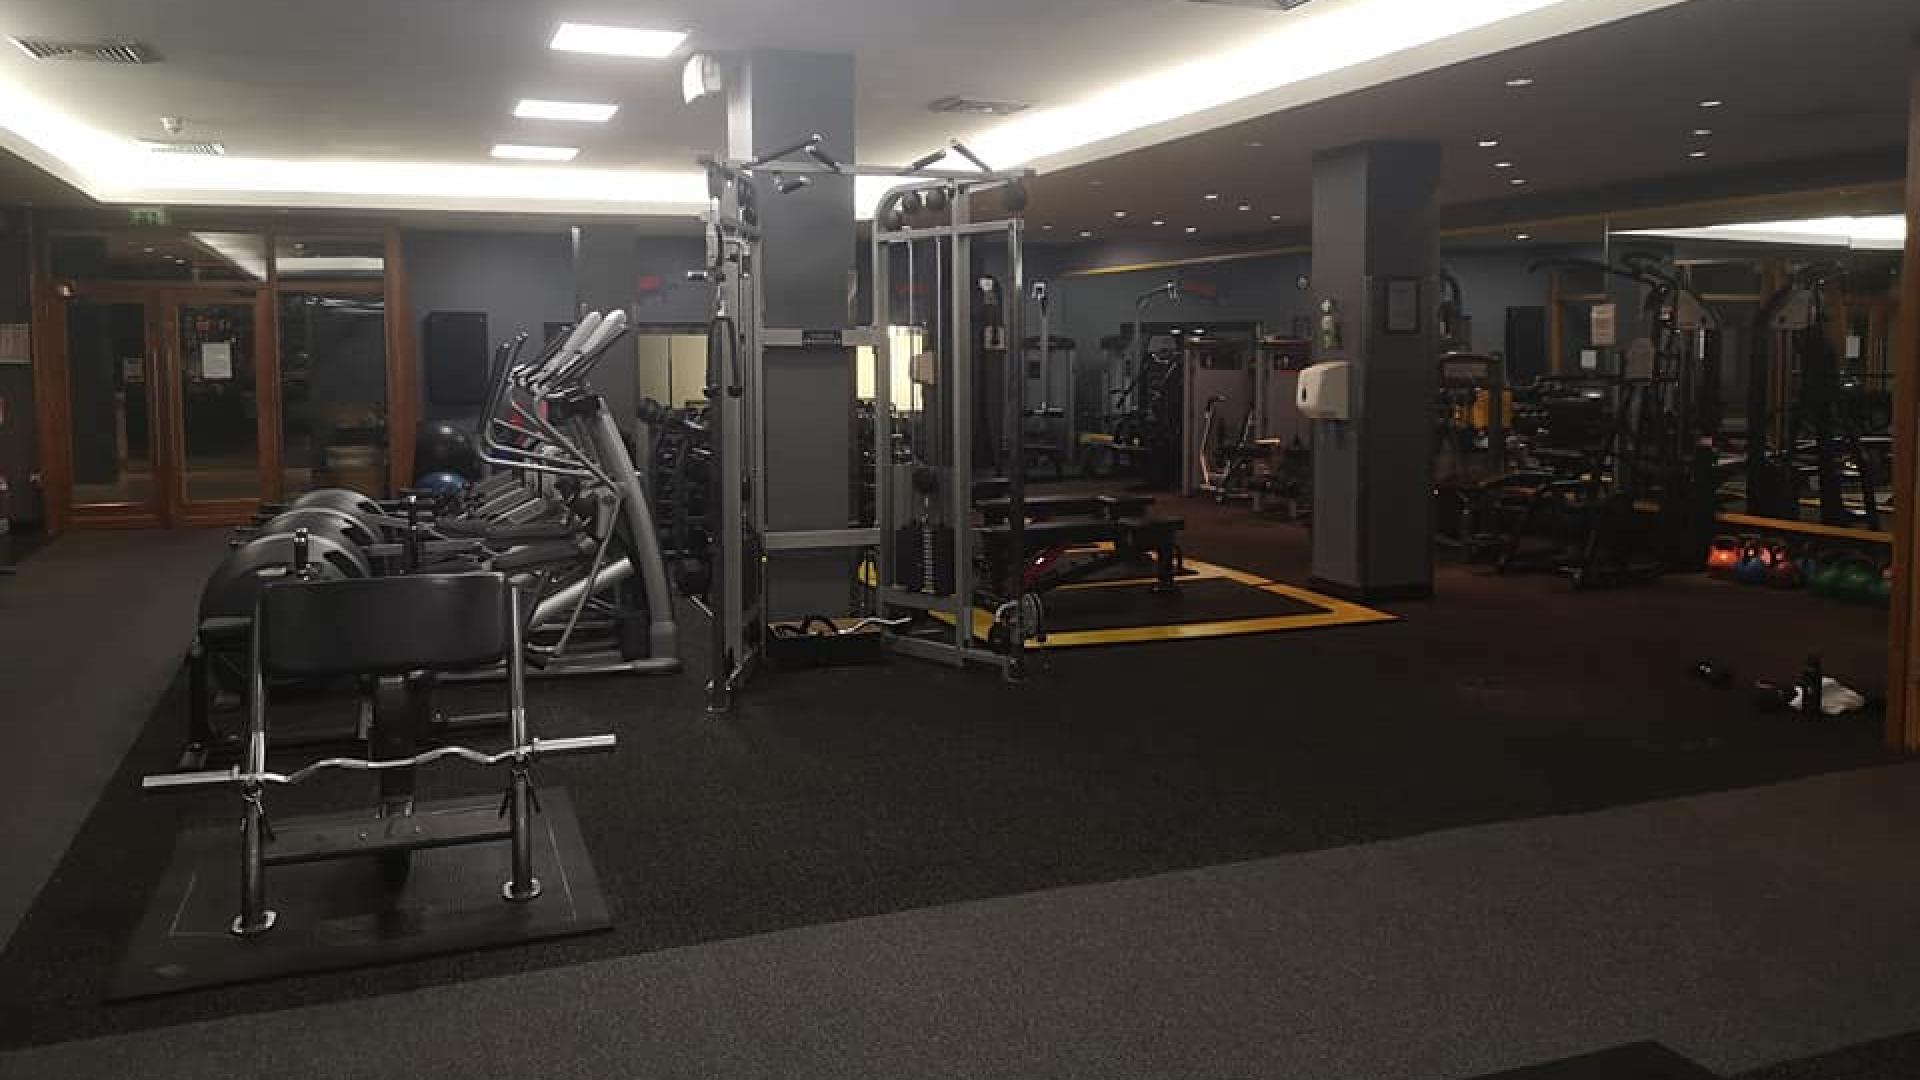 Our Image Gallery | View Photos of Our Gym | The Spencer Health Club